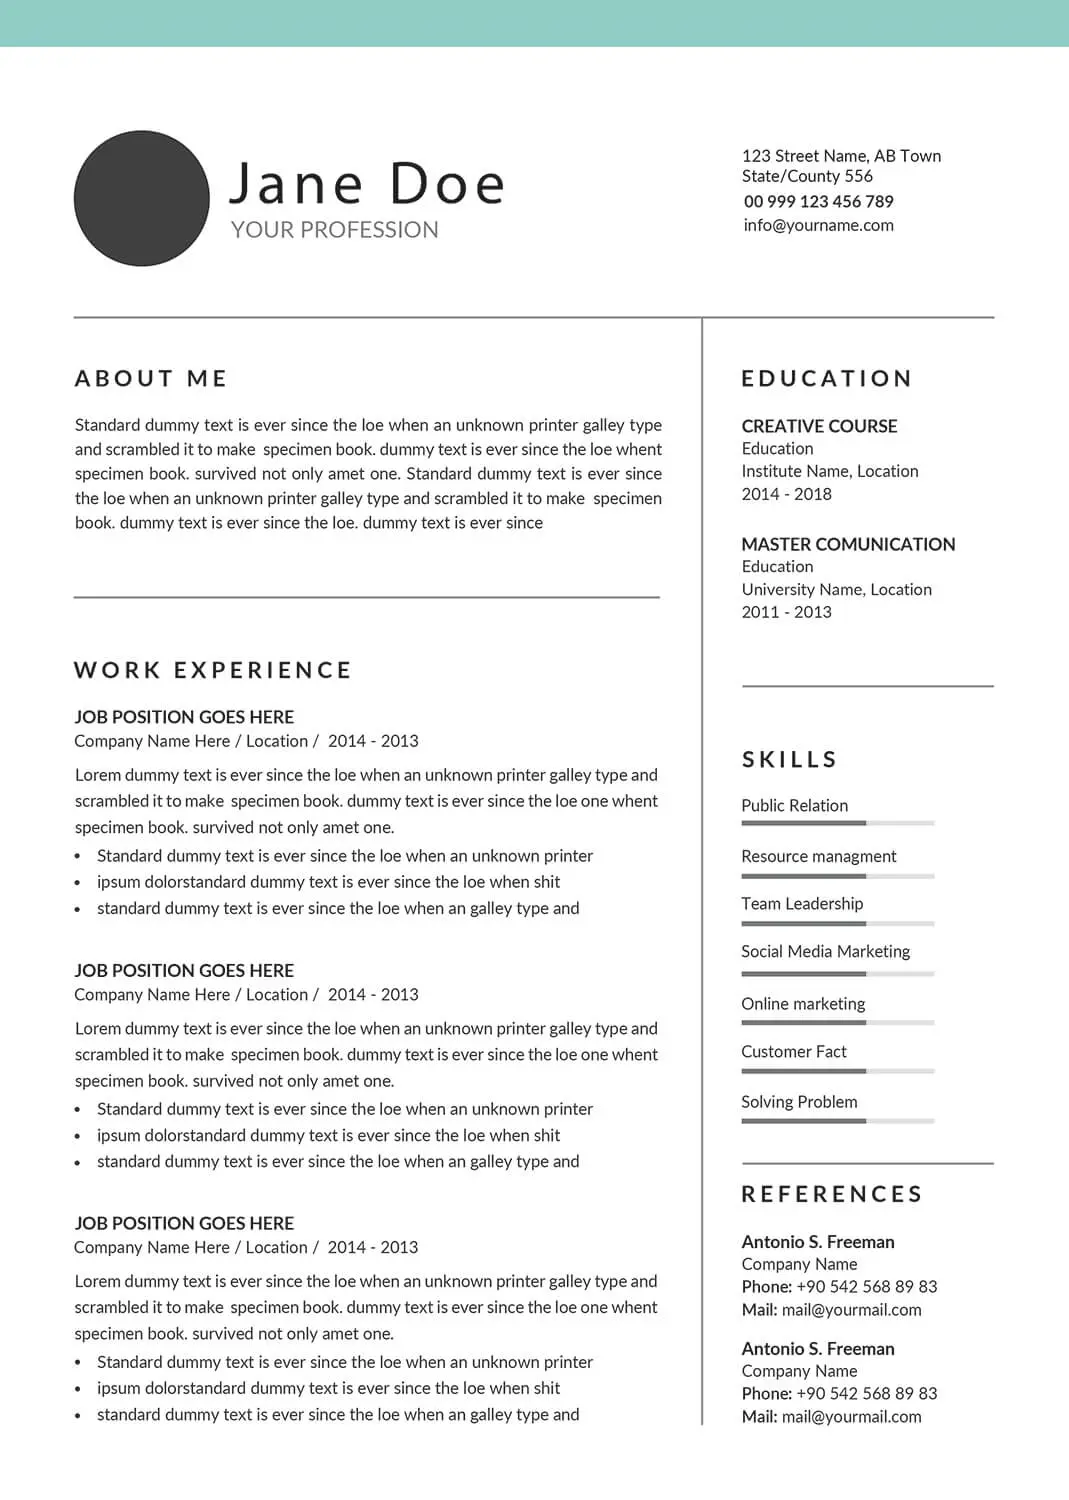 Best resume format for business
and management professionals